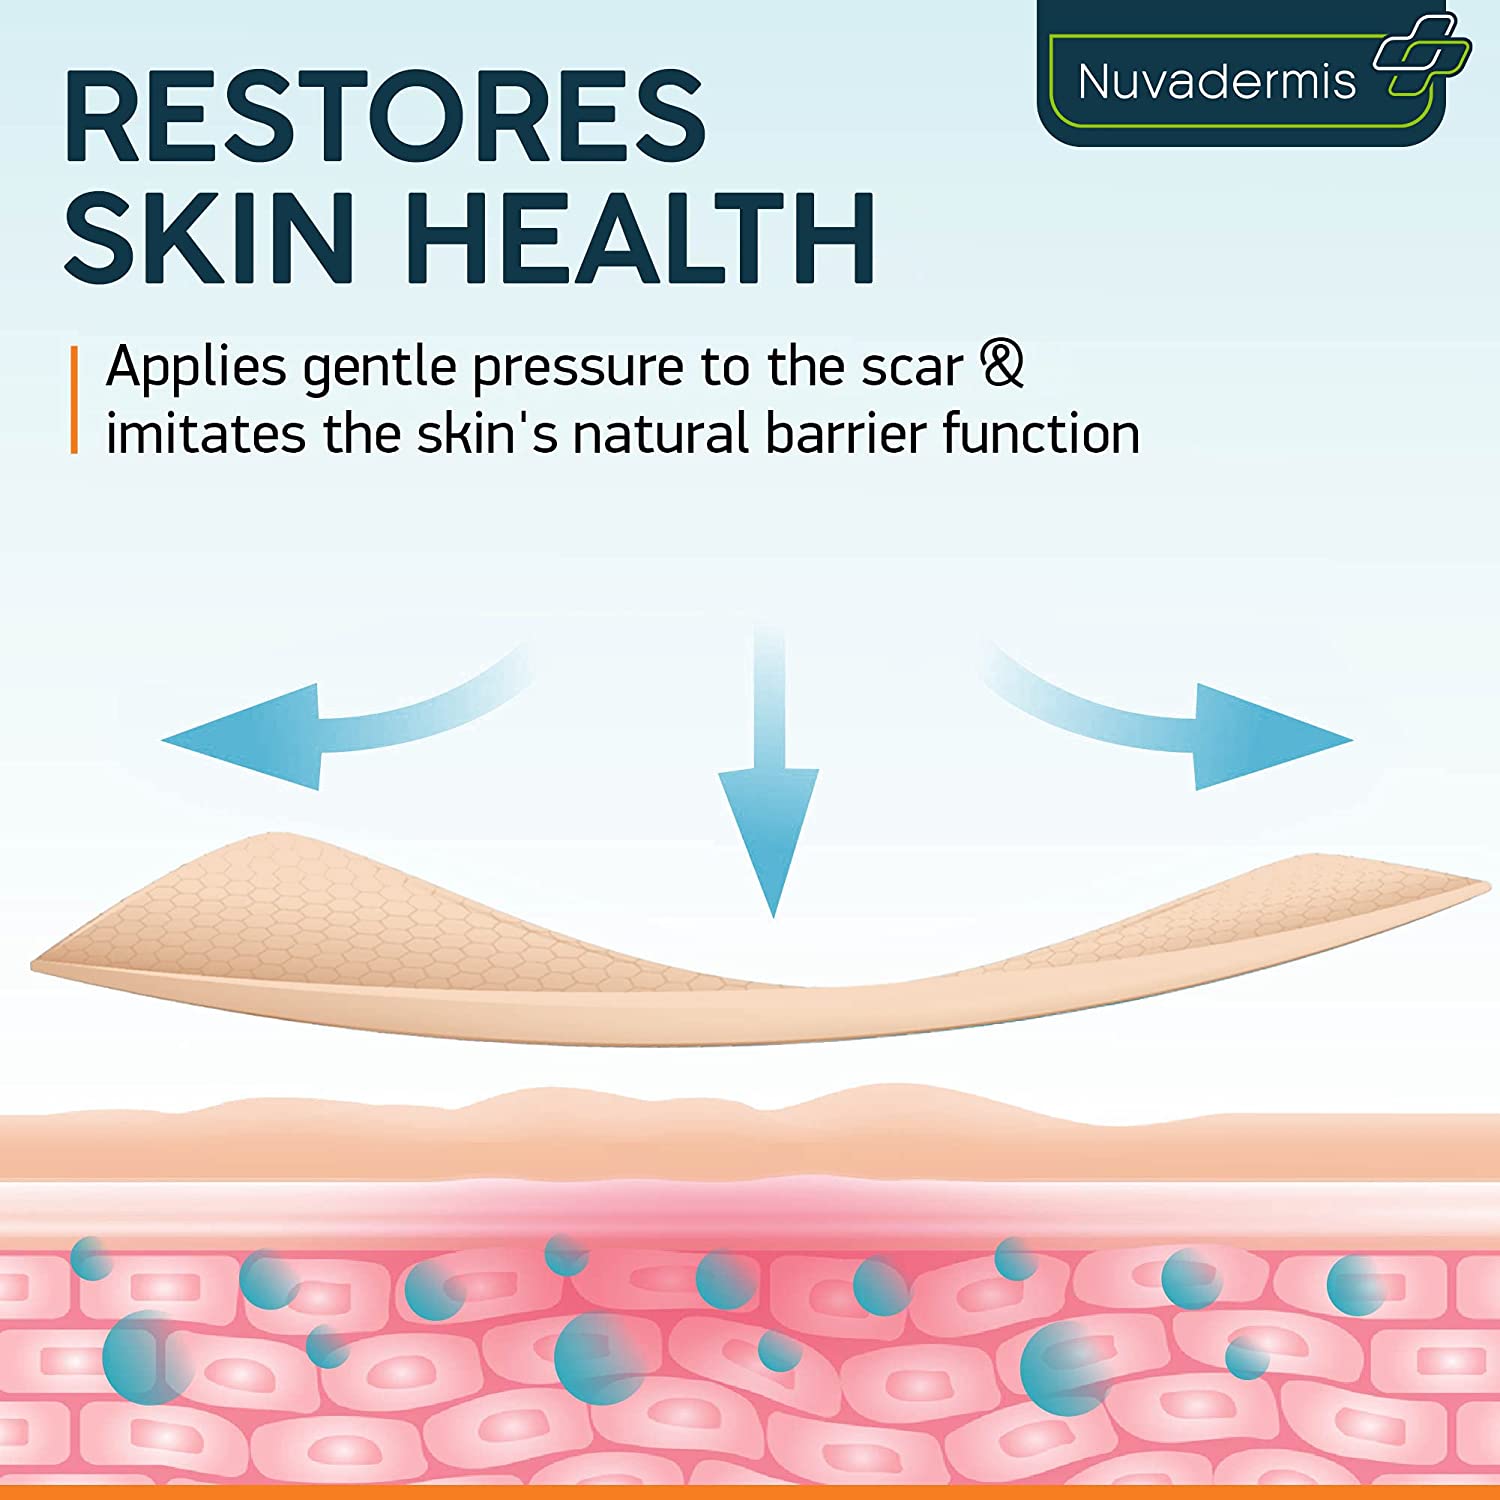 Silicone sheets by NUVADERMIS improve the color and texture of scars, making skin smooth and soft.